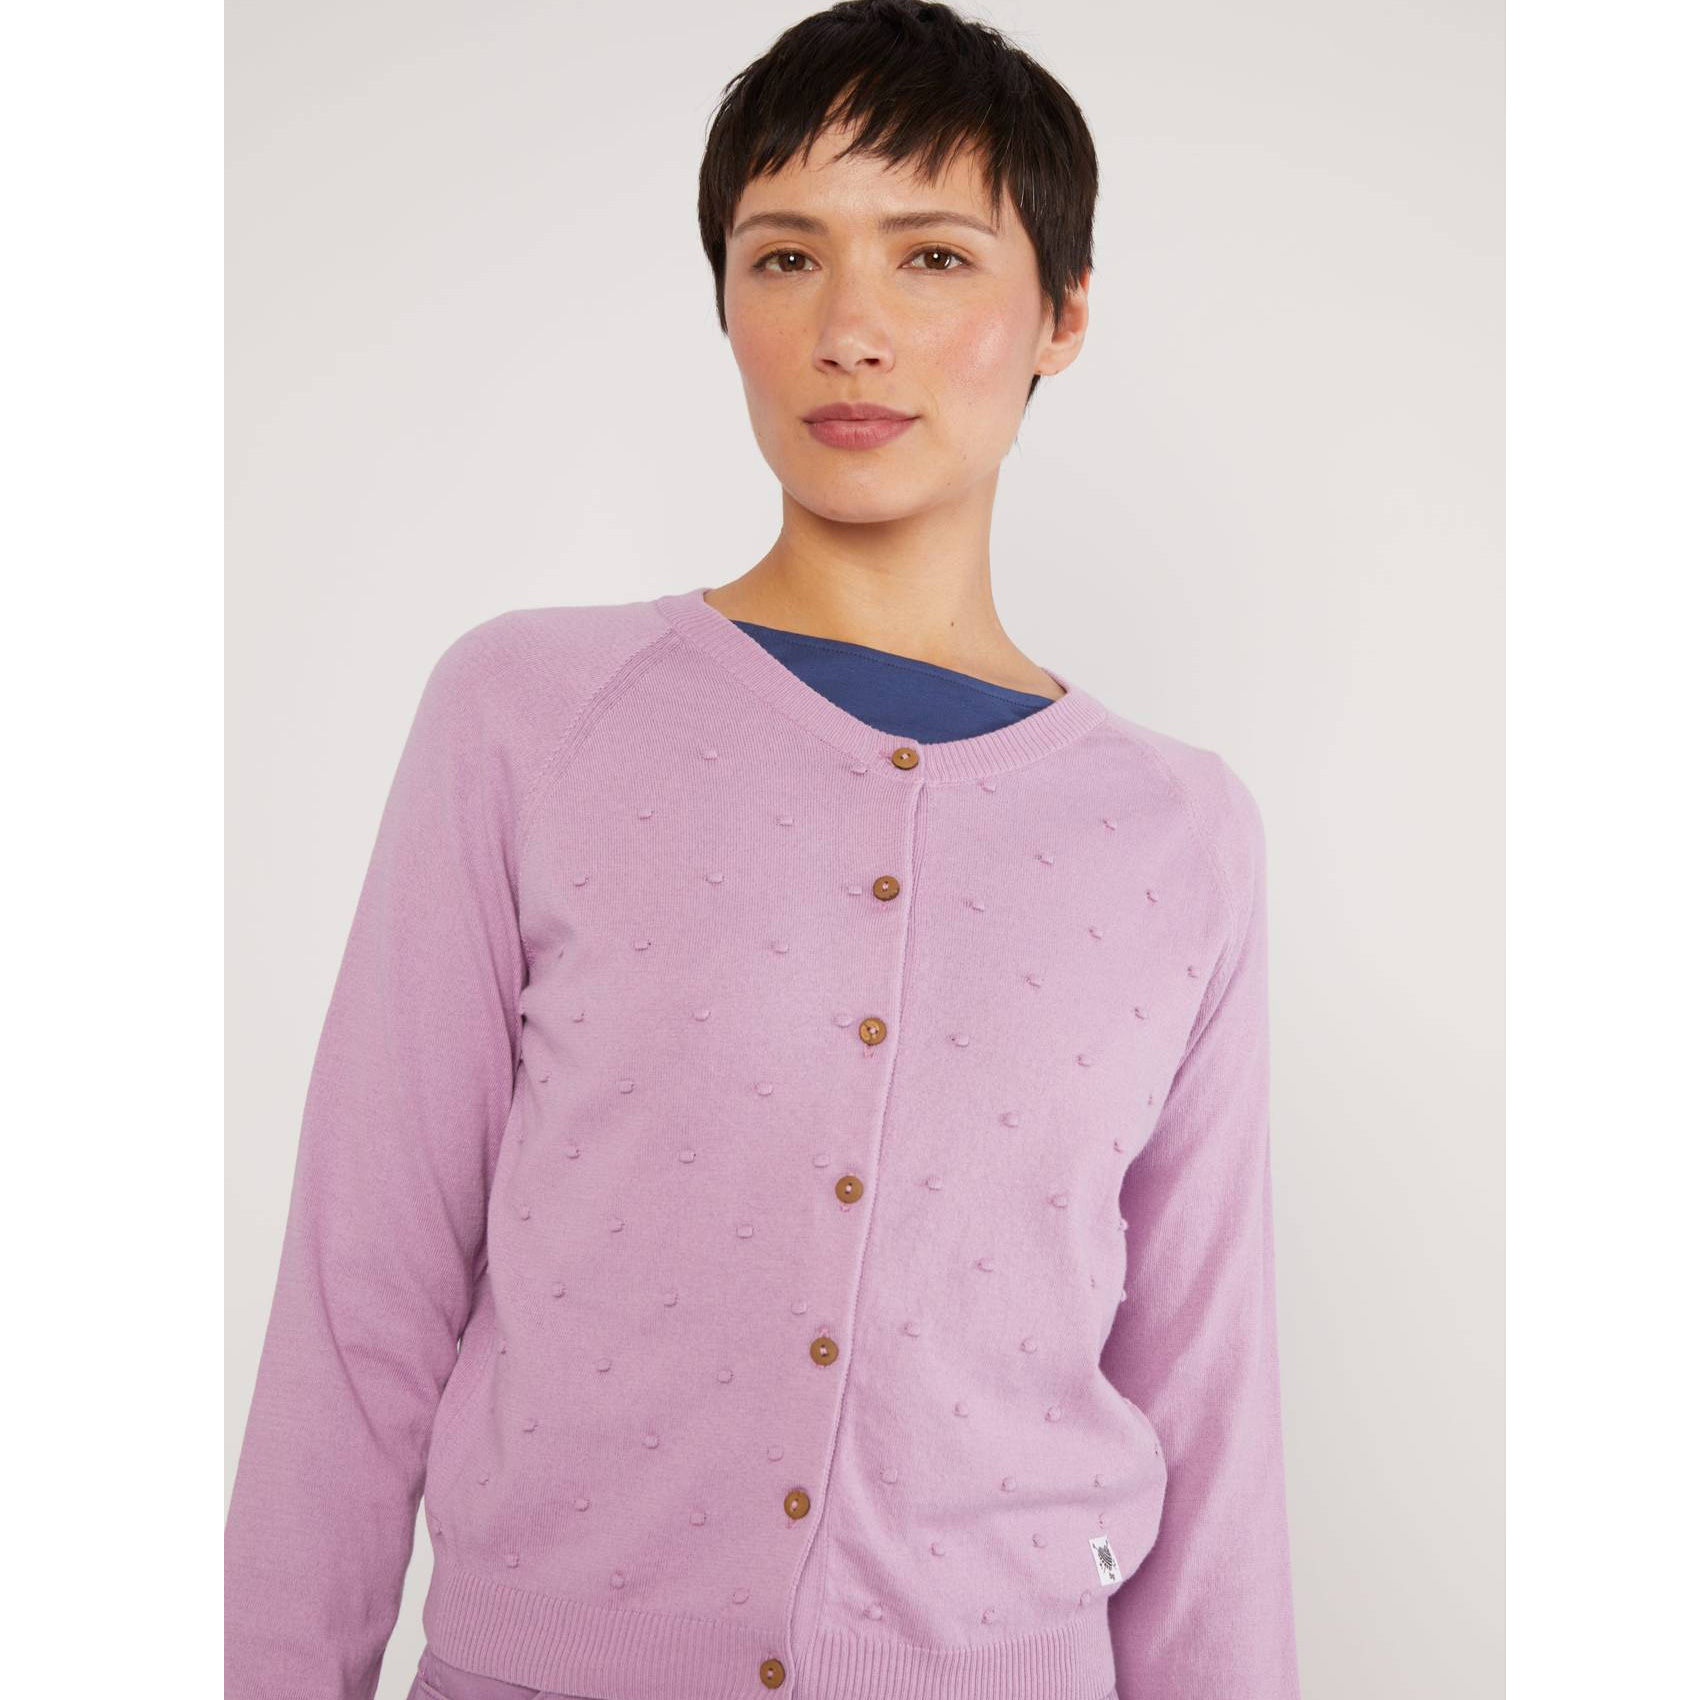 Blutsgeschwister Cardigan Knot Hop, Farbe: funny bugs lilac knit